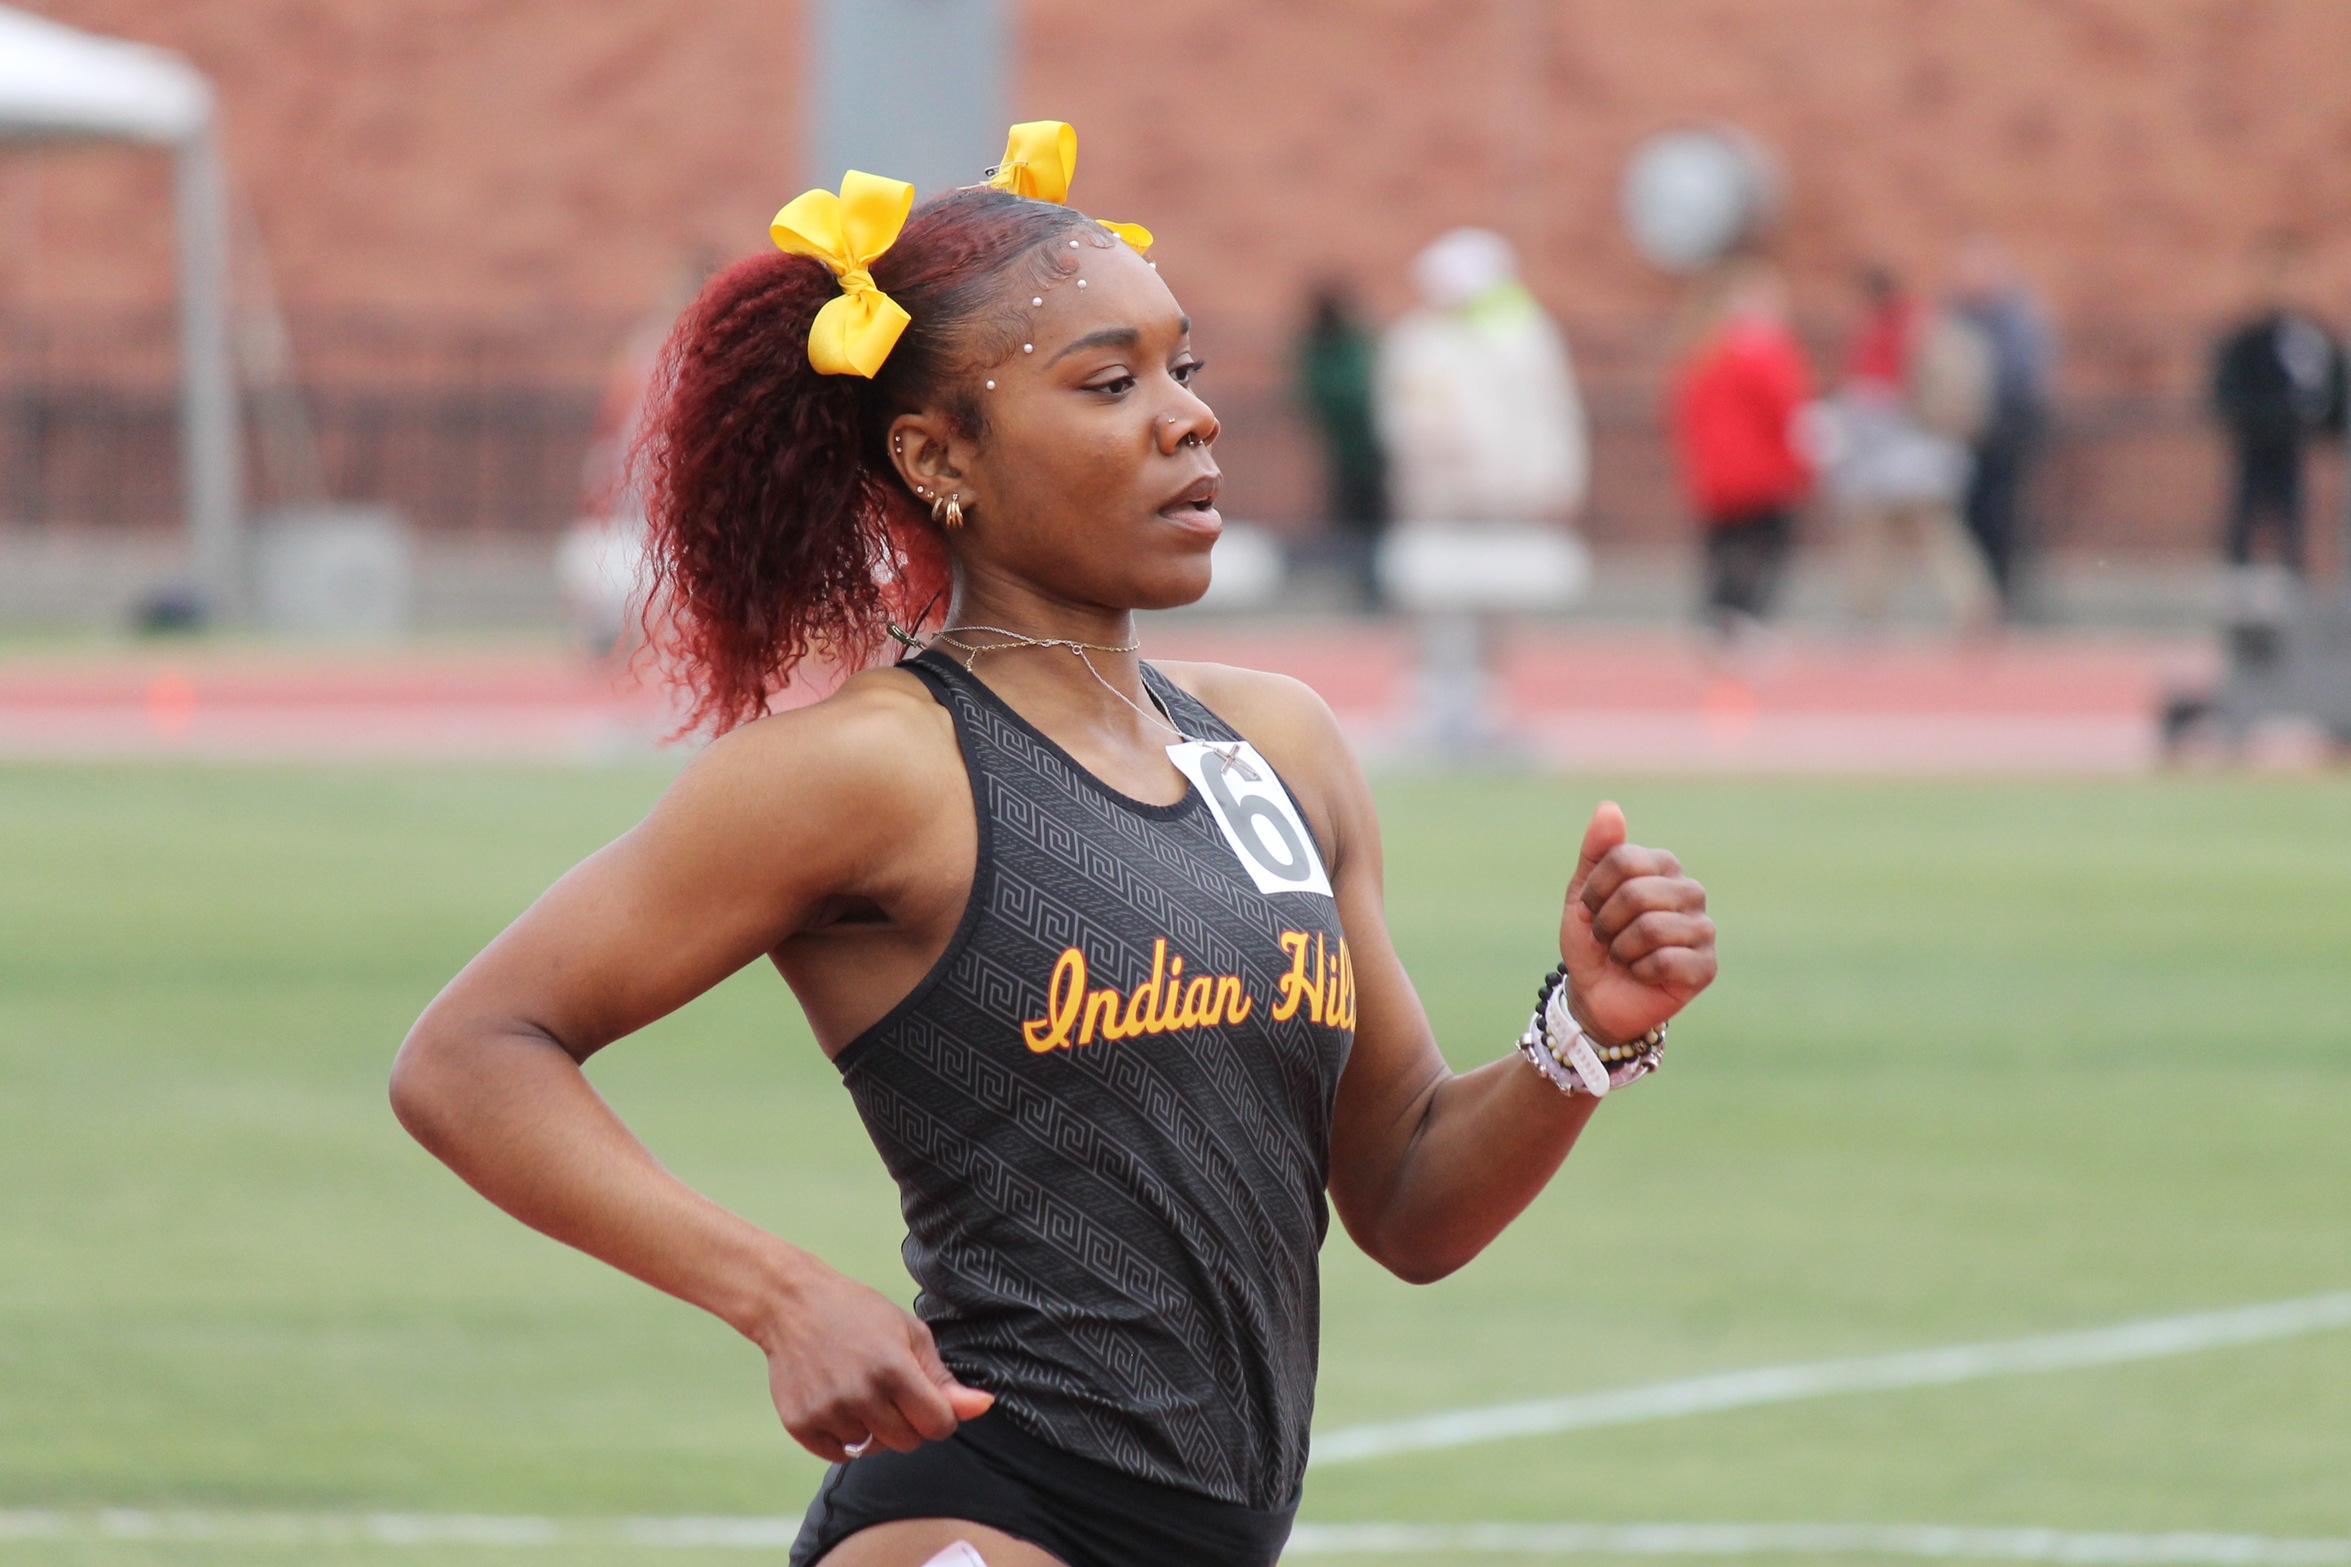 SIMMONS SPRINTS TO SCHOOL RECORD AT DRAKE RELAYS